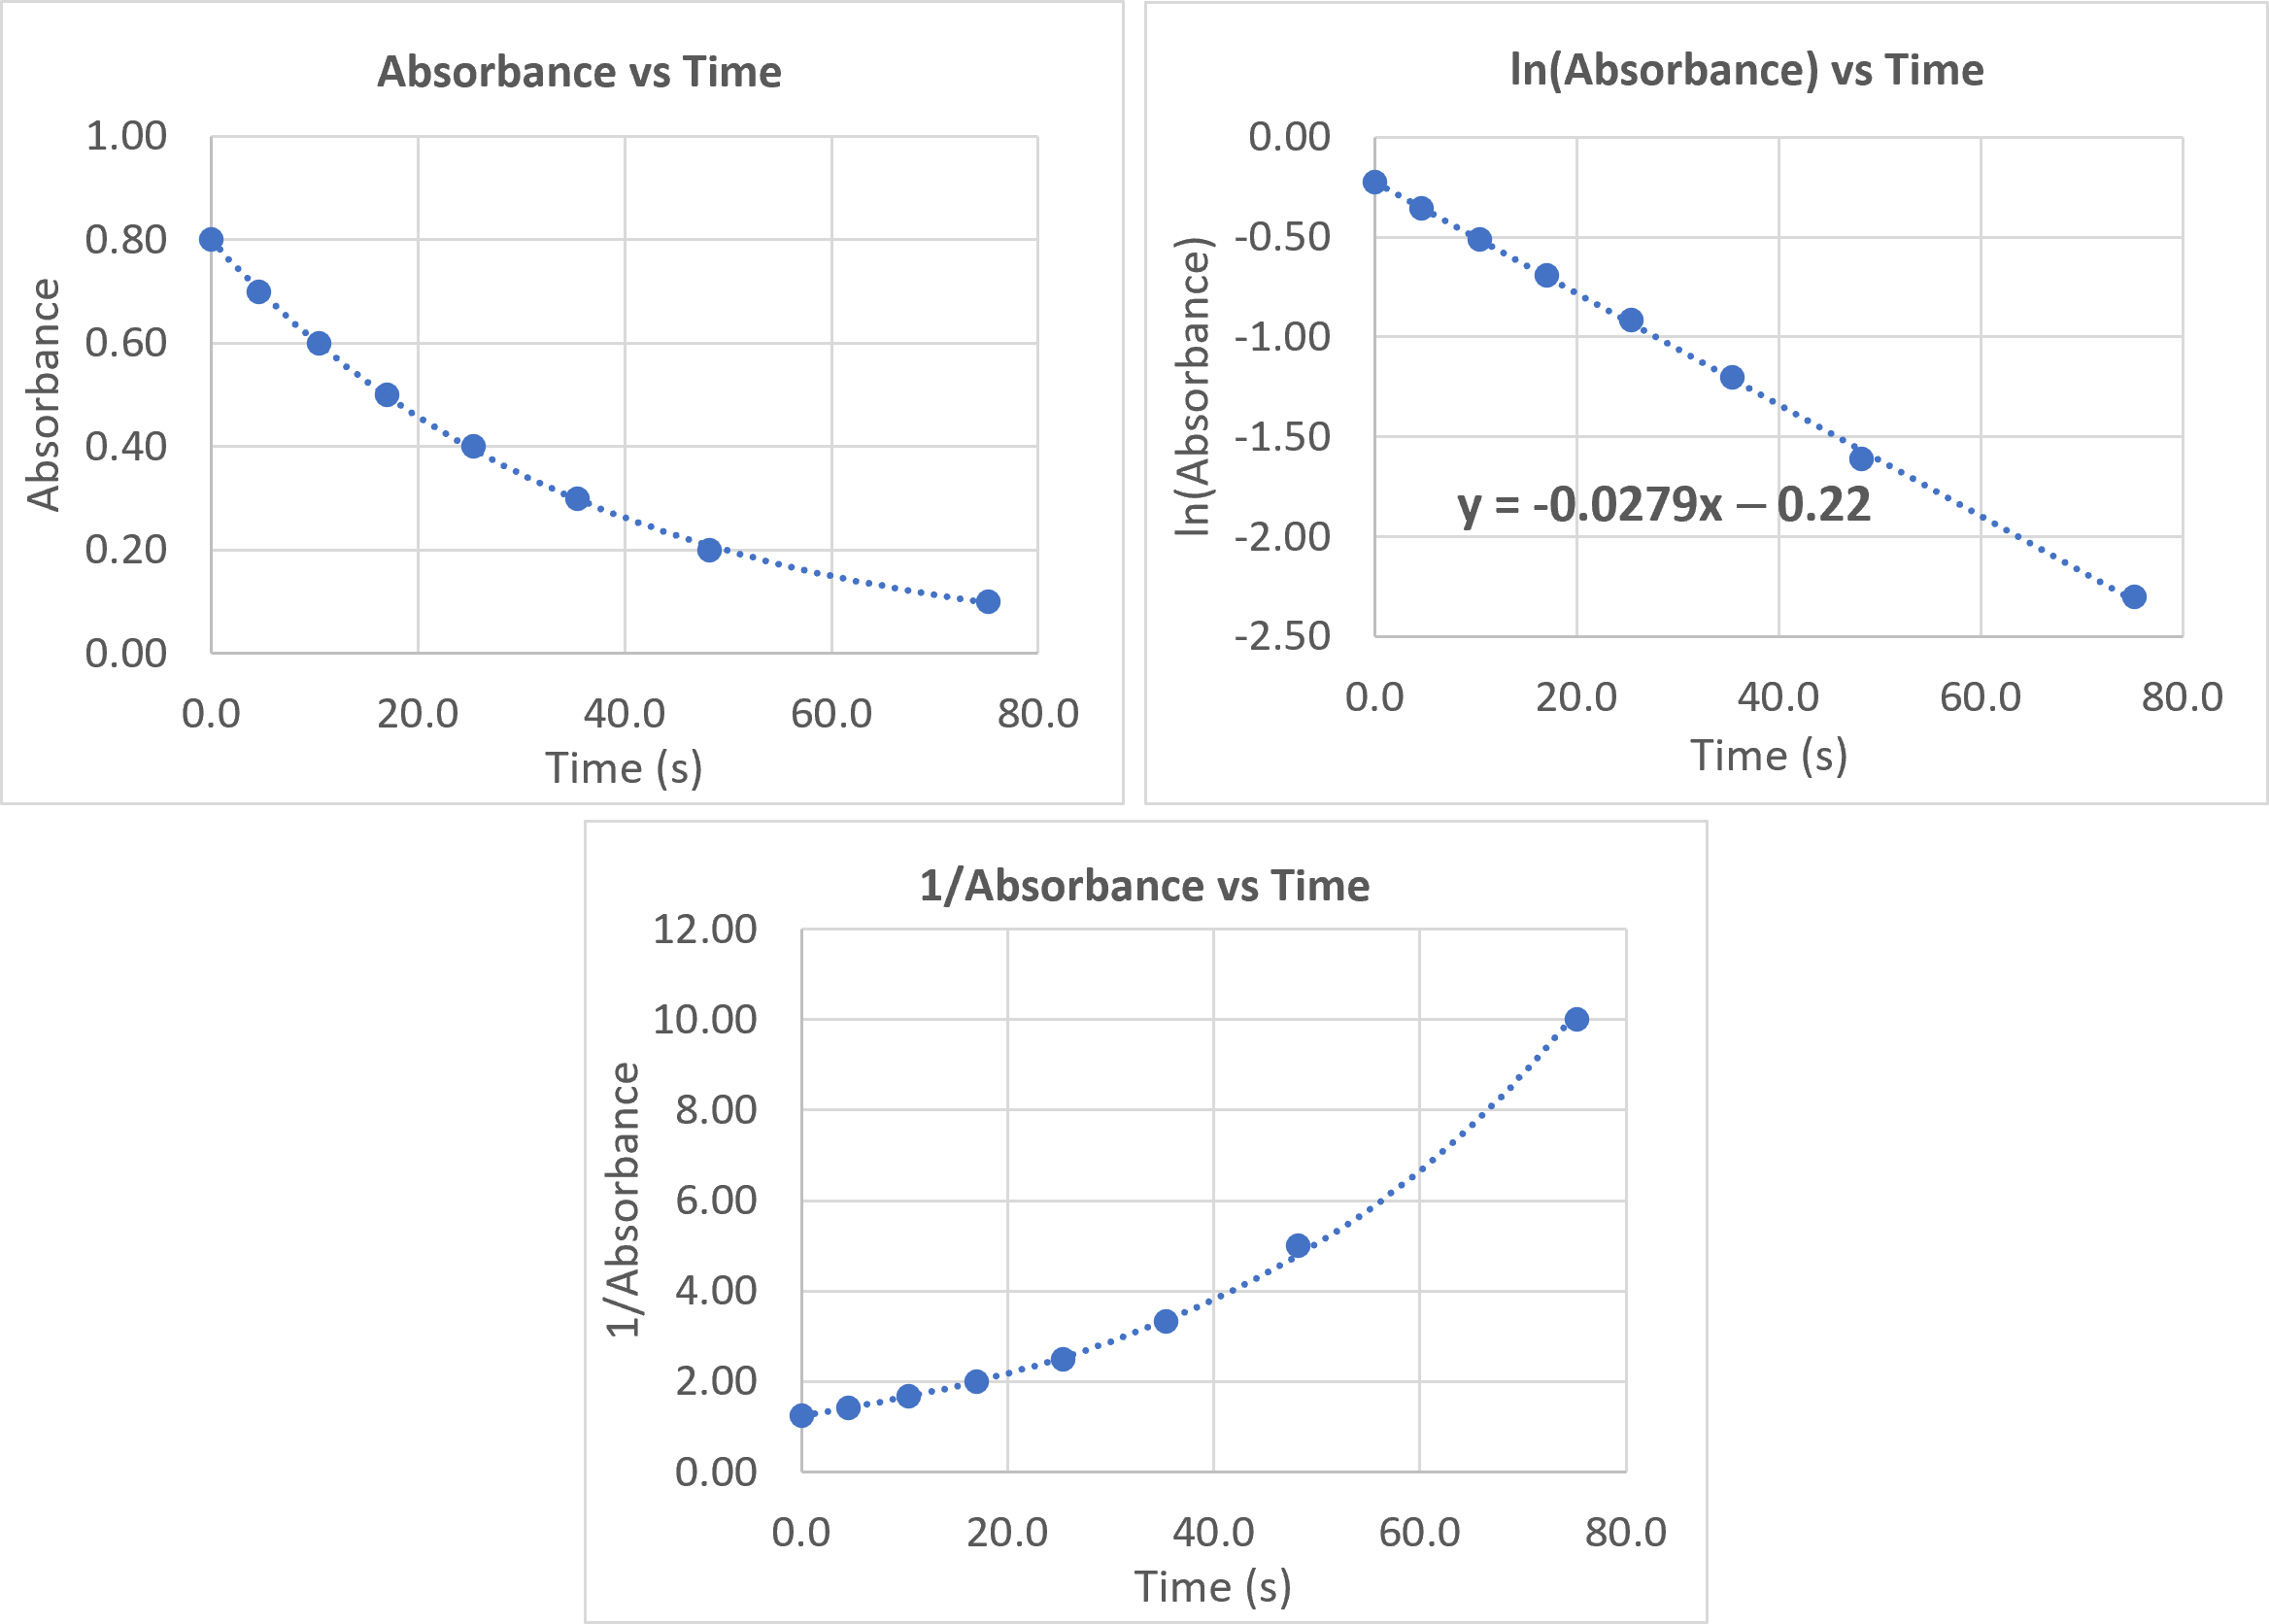 Three graphs are shown. (1) Absorbance vs. time. The plot is a nonlinear curve. (2) ln(absorbance) vs. time. The plot is a linear curve with the fit y = -0.0279x - 0.22. (3) 1/Absorbance vs. time. The plot is a nonlinear curve.